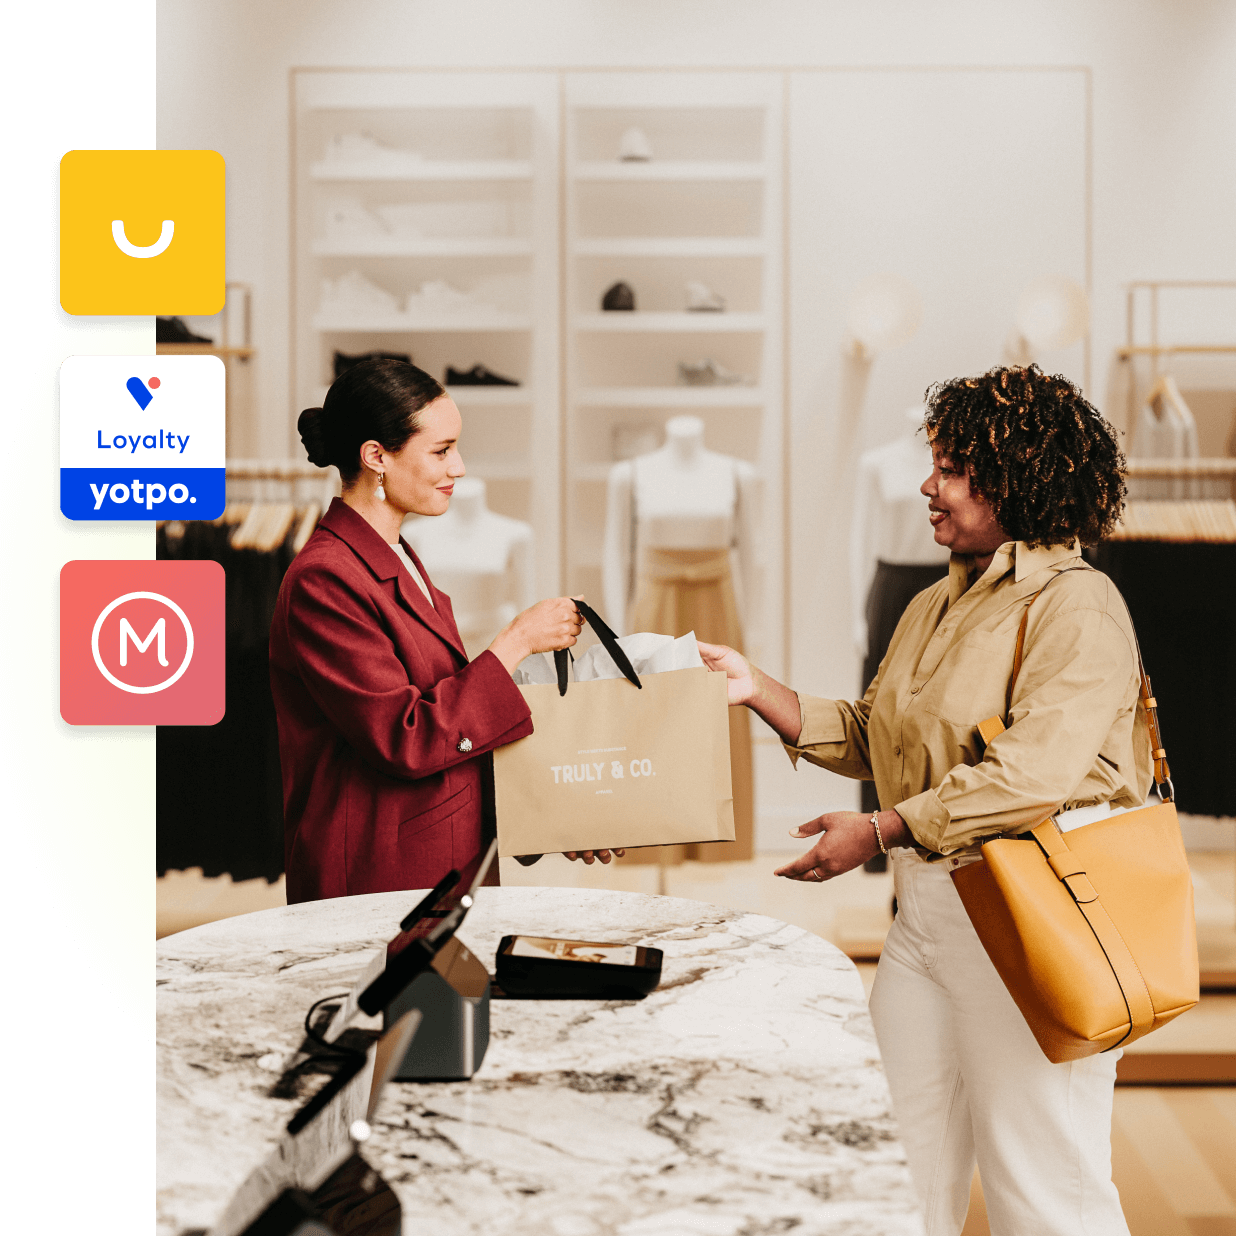 An elegant sales associate from Truly and Co hands a shopping bag to a chic customer. The two women are standing close to the checkout counter in a bright and beautifully-lit mall store. To the left of the image are icons for various clienteling apps available in the Shopify app store.